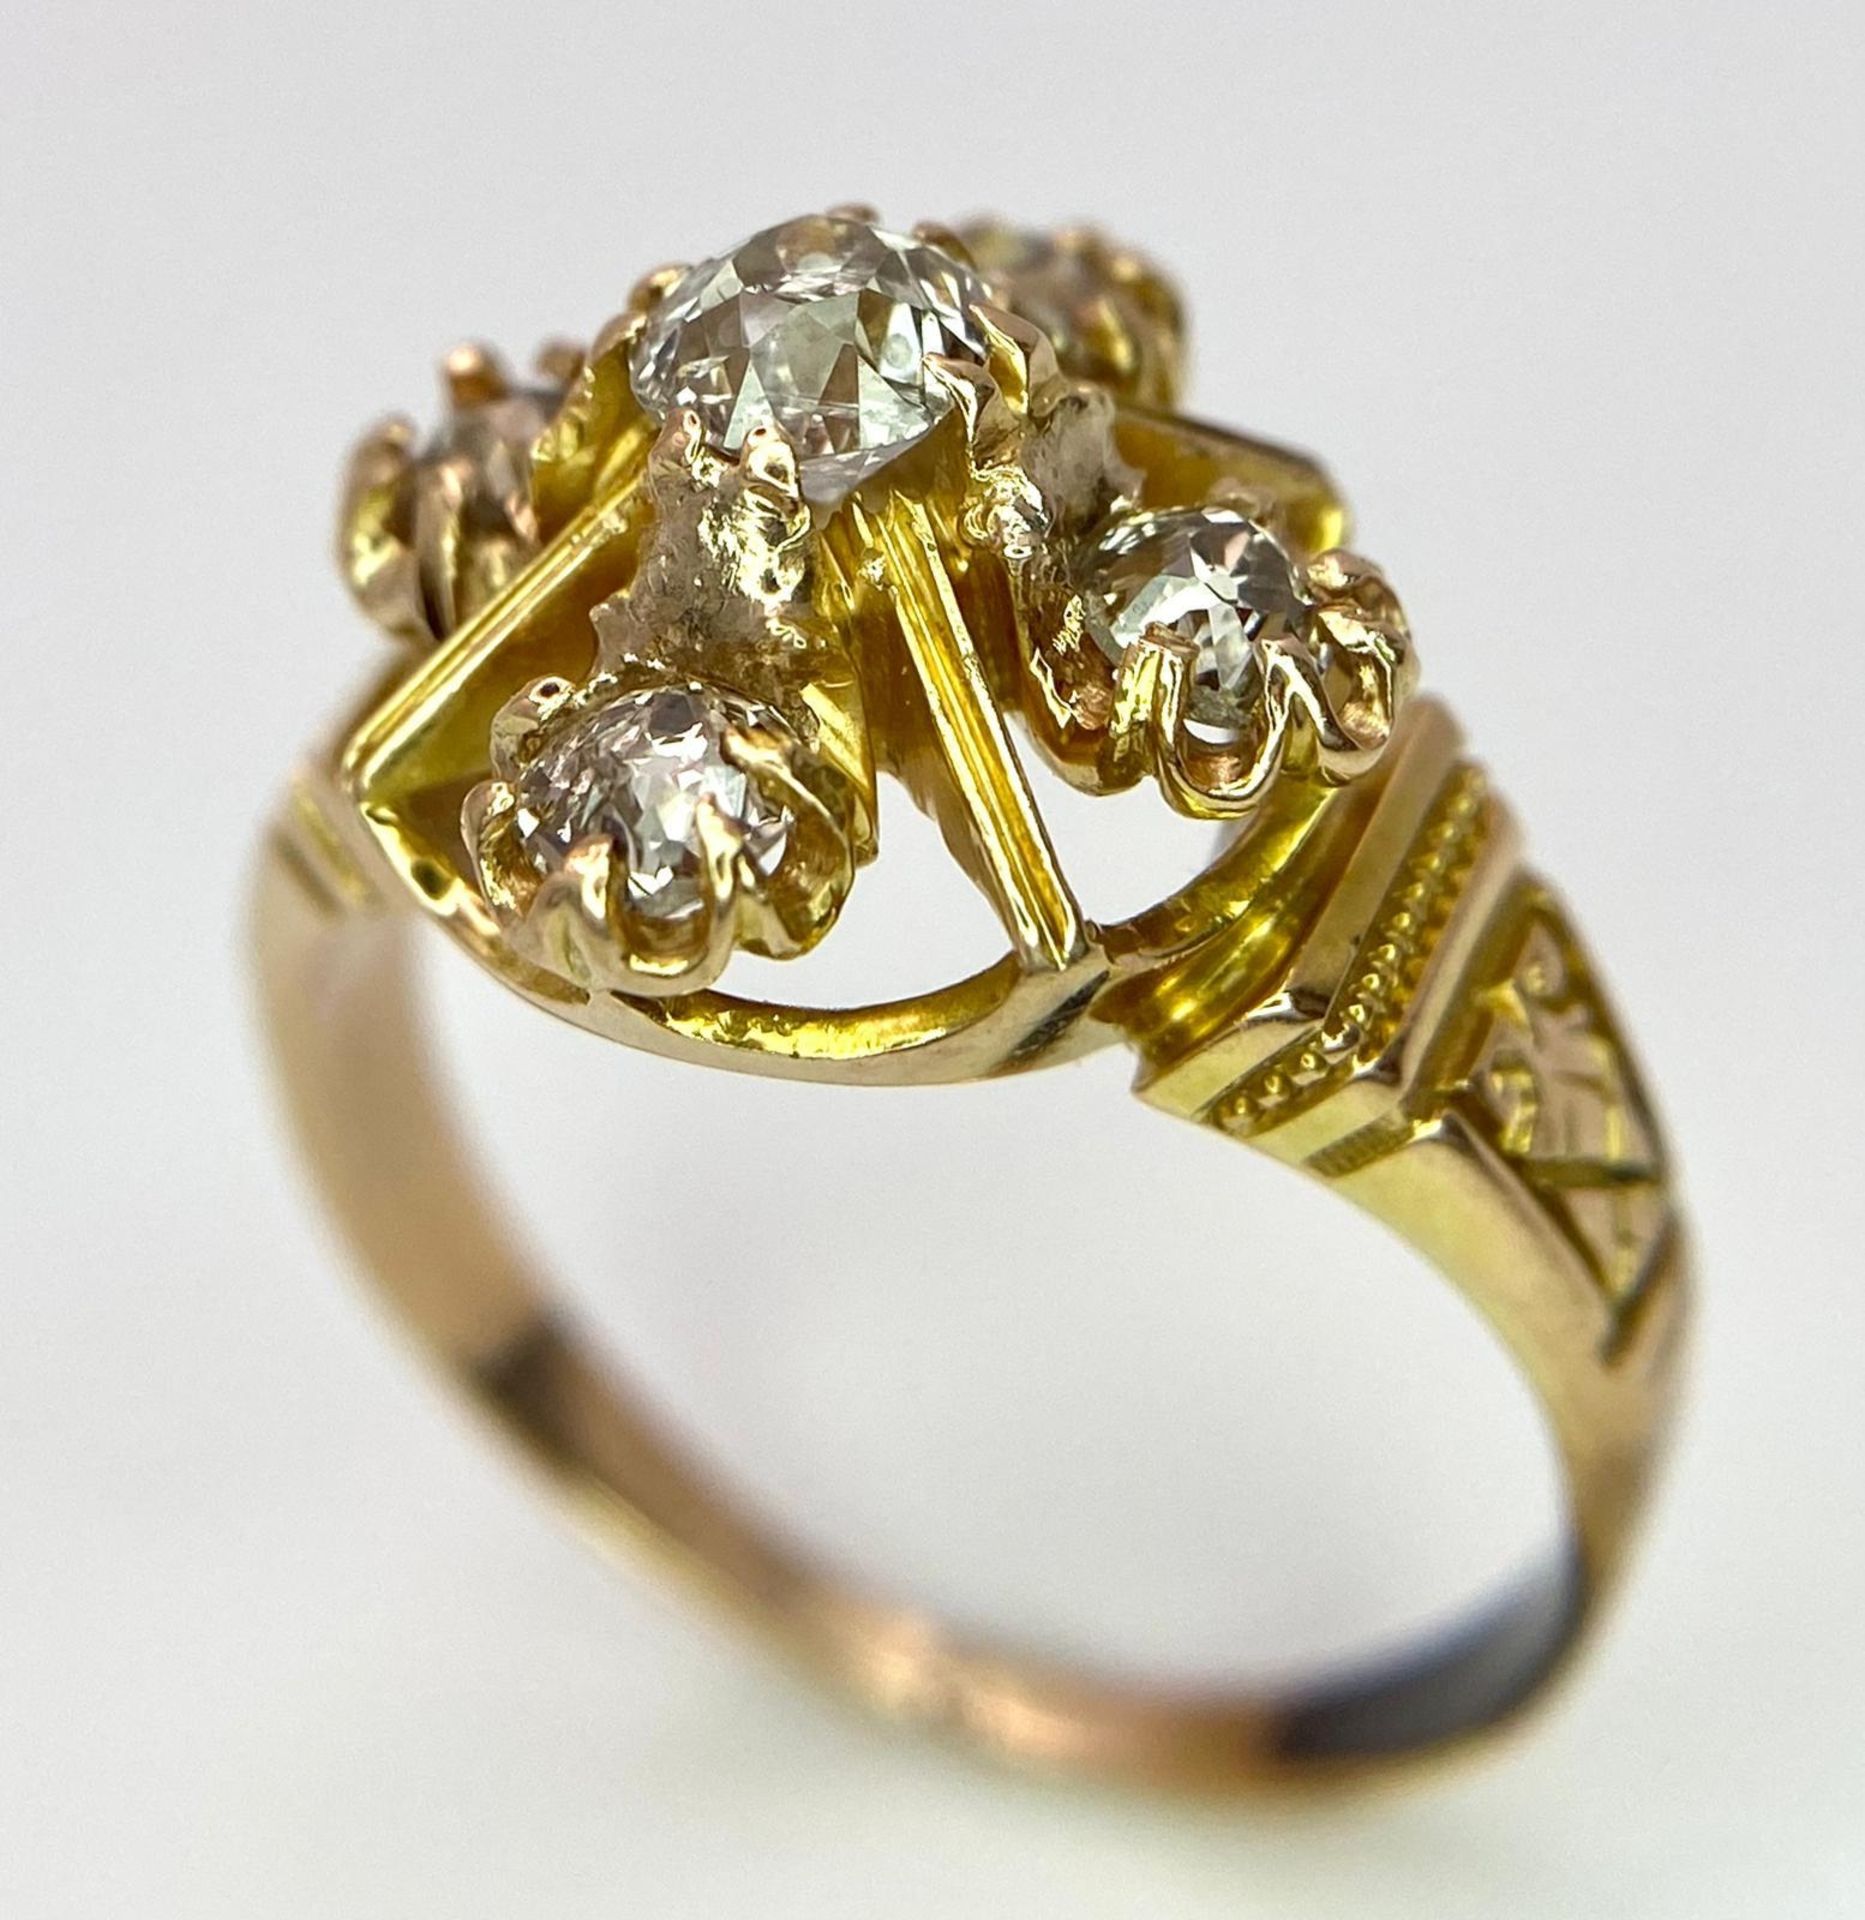 A 9K Yellow Gold (tested) Diamond Ring. Five round cut diamonds on a raised setting. Size N. 4.32g - Image 2 of 5